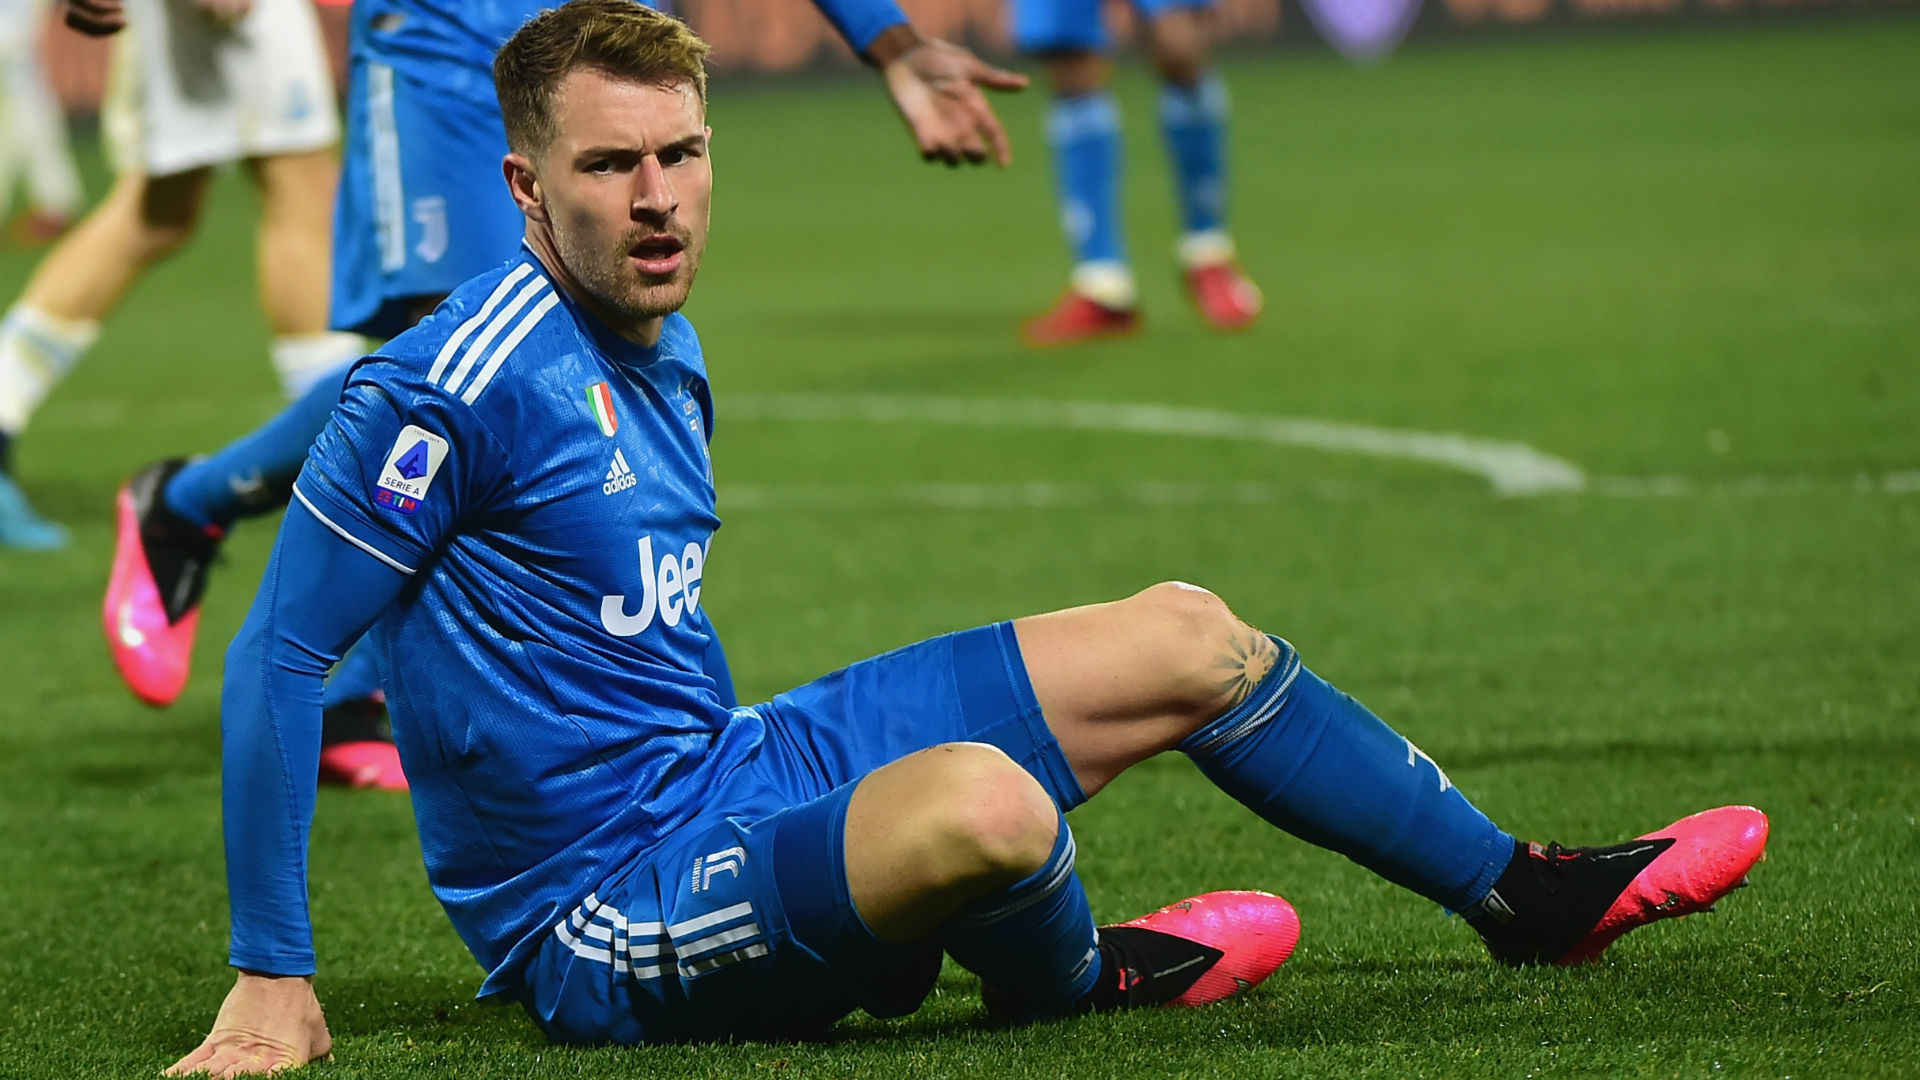 Juventus were beaten by Lyon on Wednesday but Aaron Ramsey believes they will progress in the Champions League.